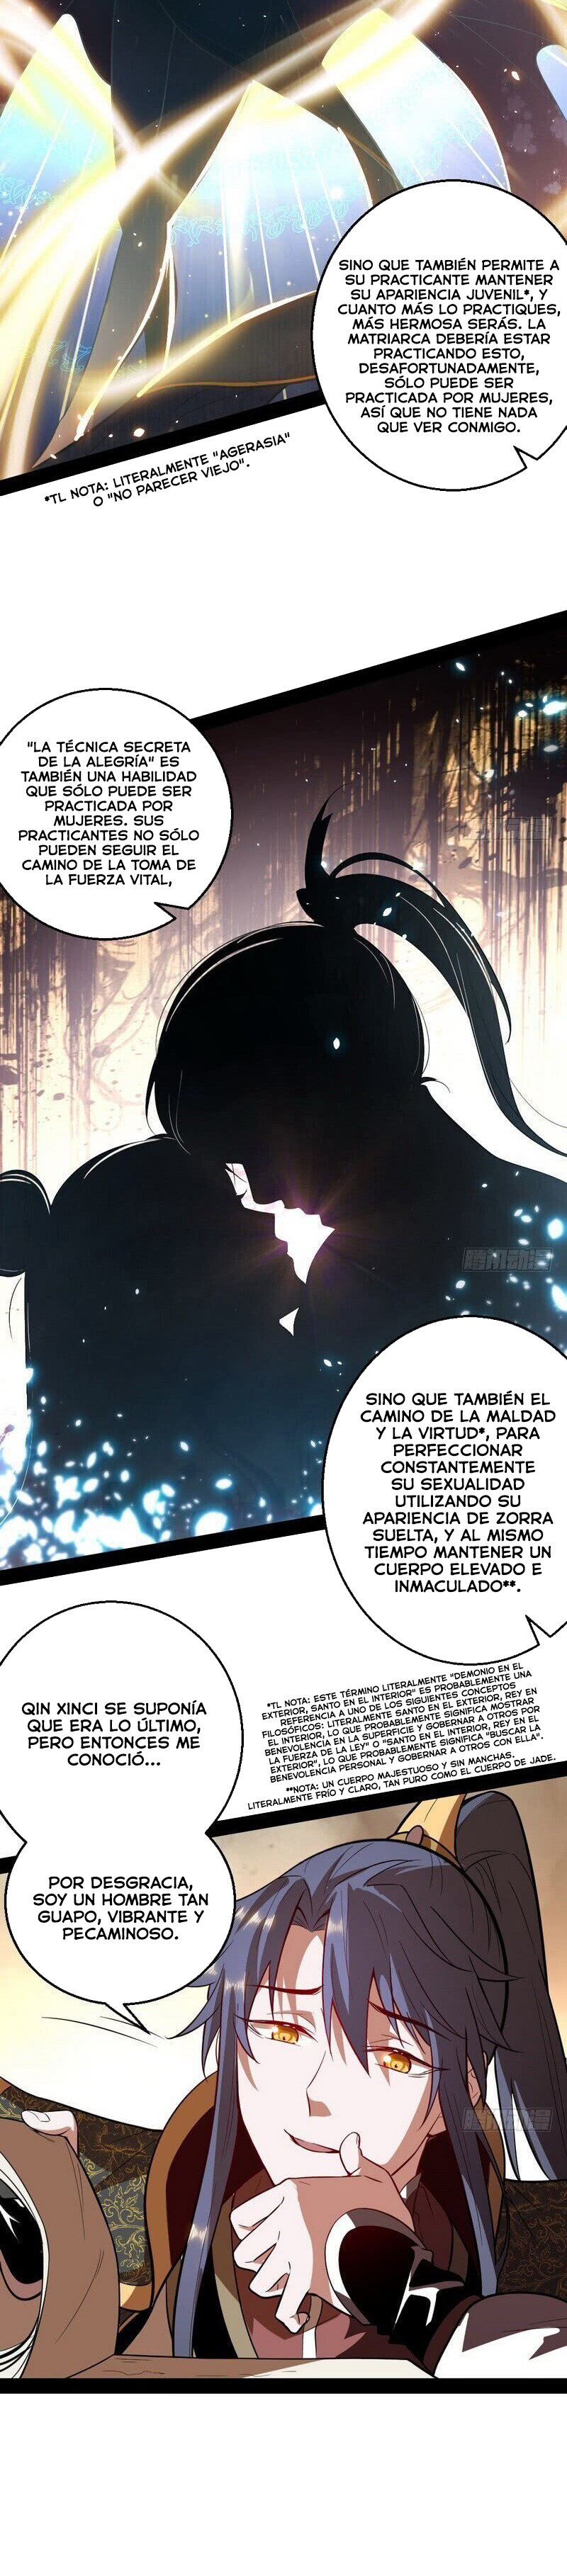 Manga Soy un dios maligno Chapter 25 image number 19